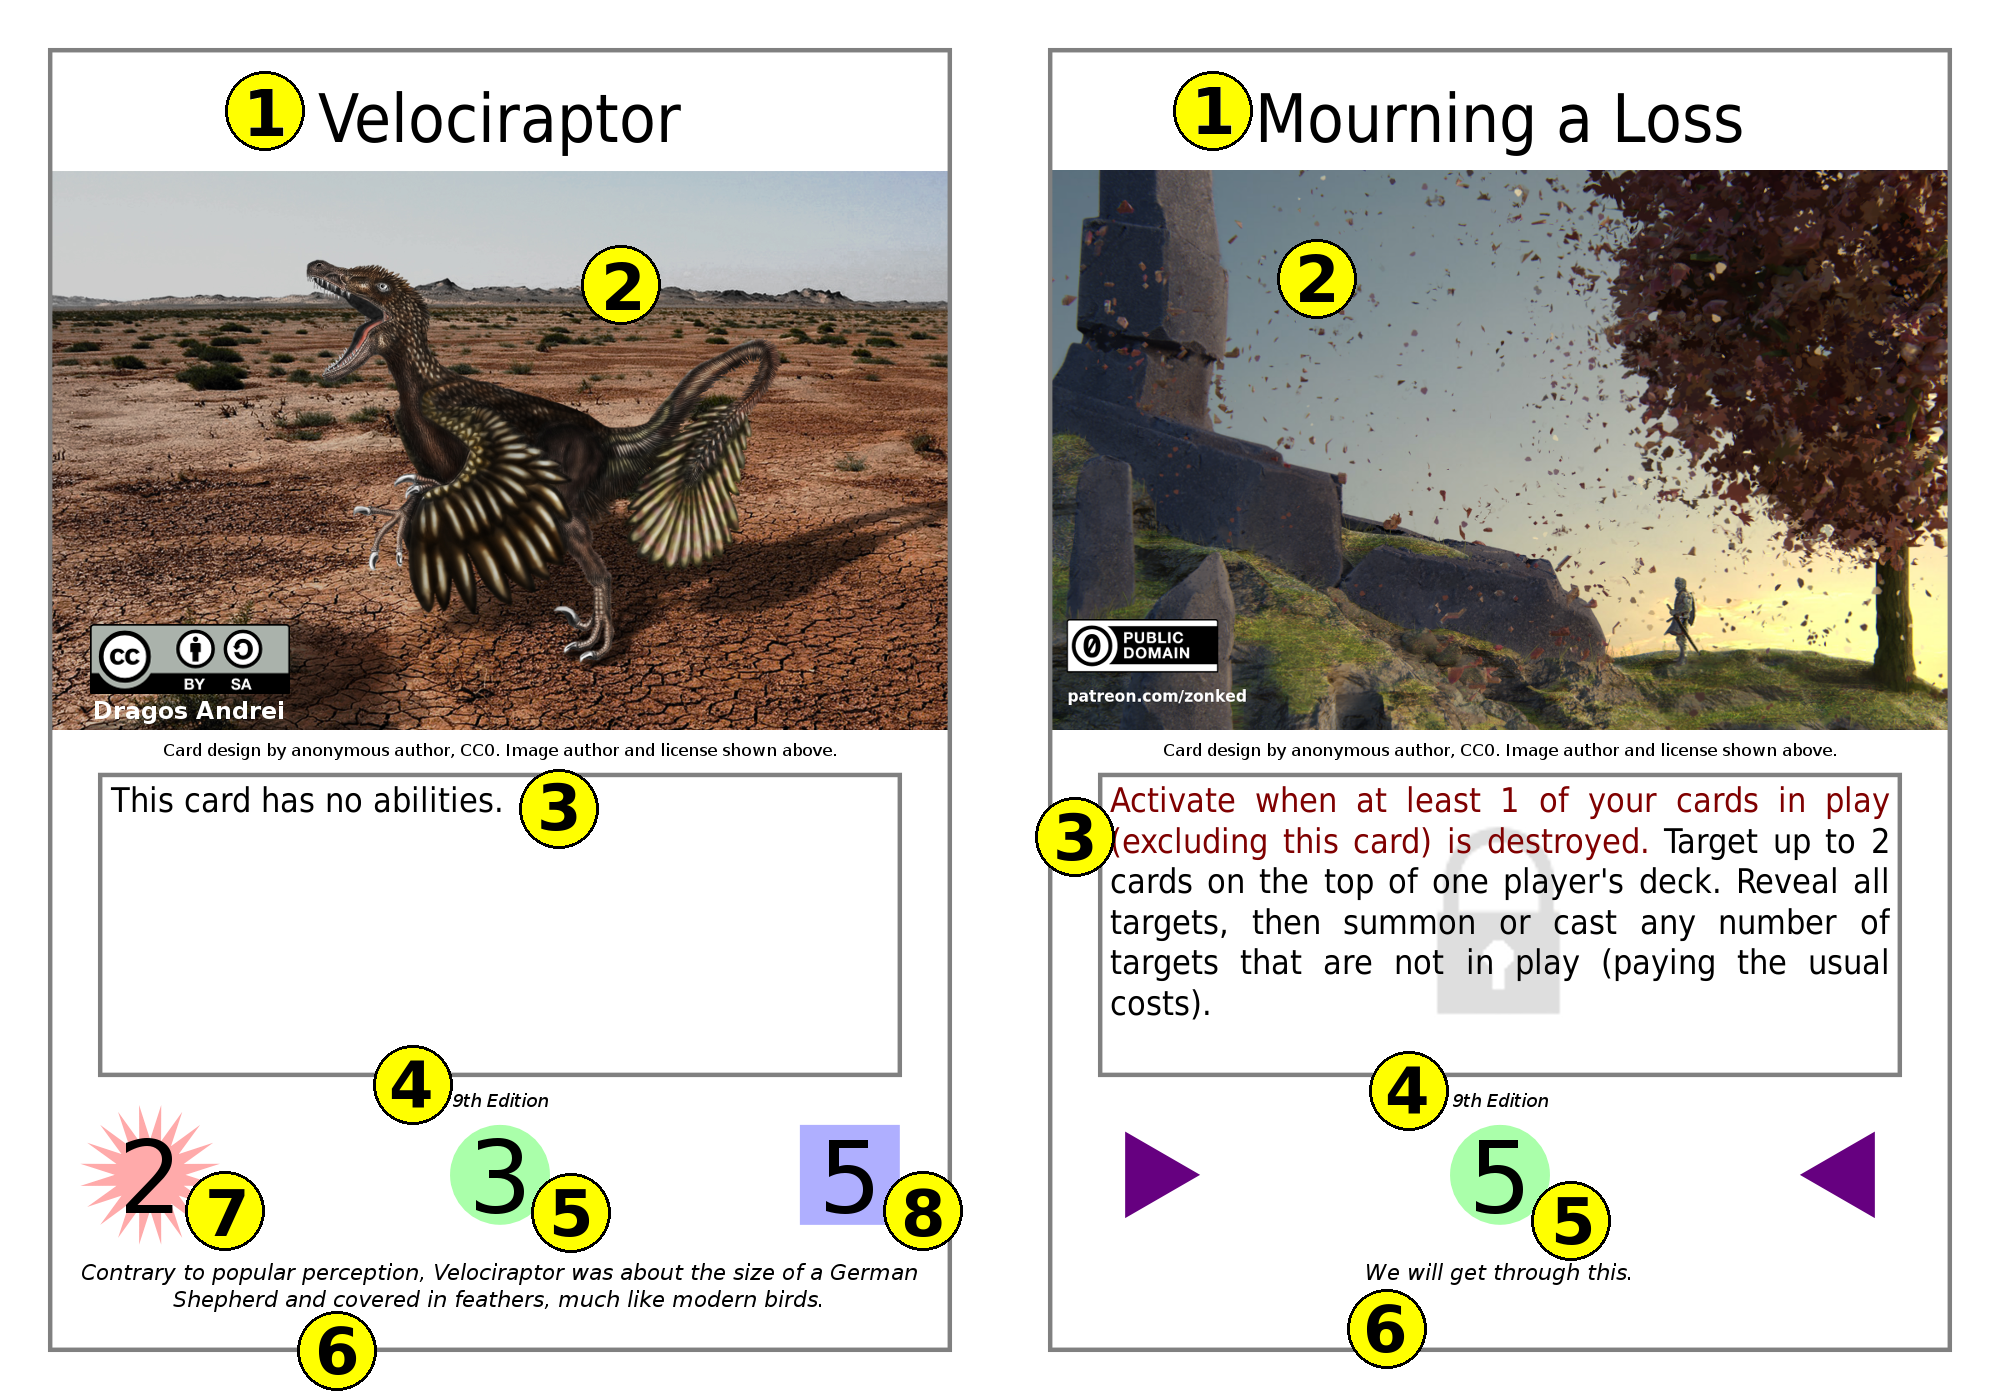 Visual of two cards (“Velociraptor” and “Mourning a Loss”).